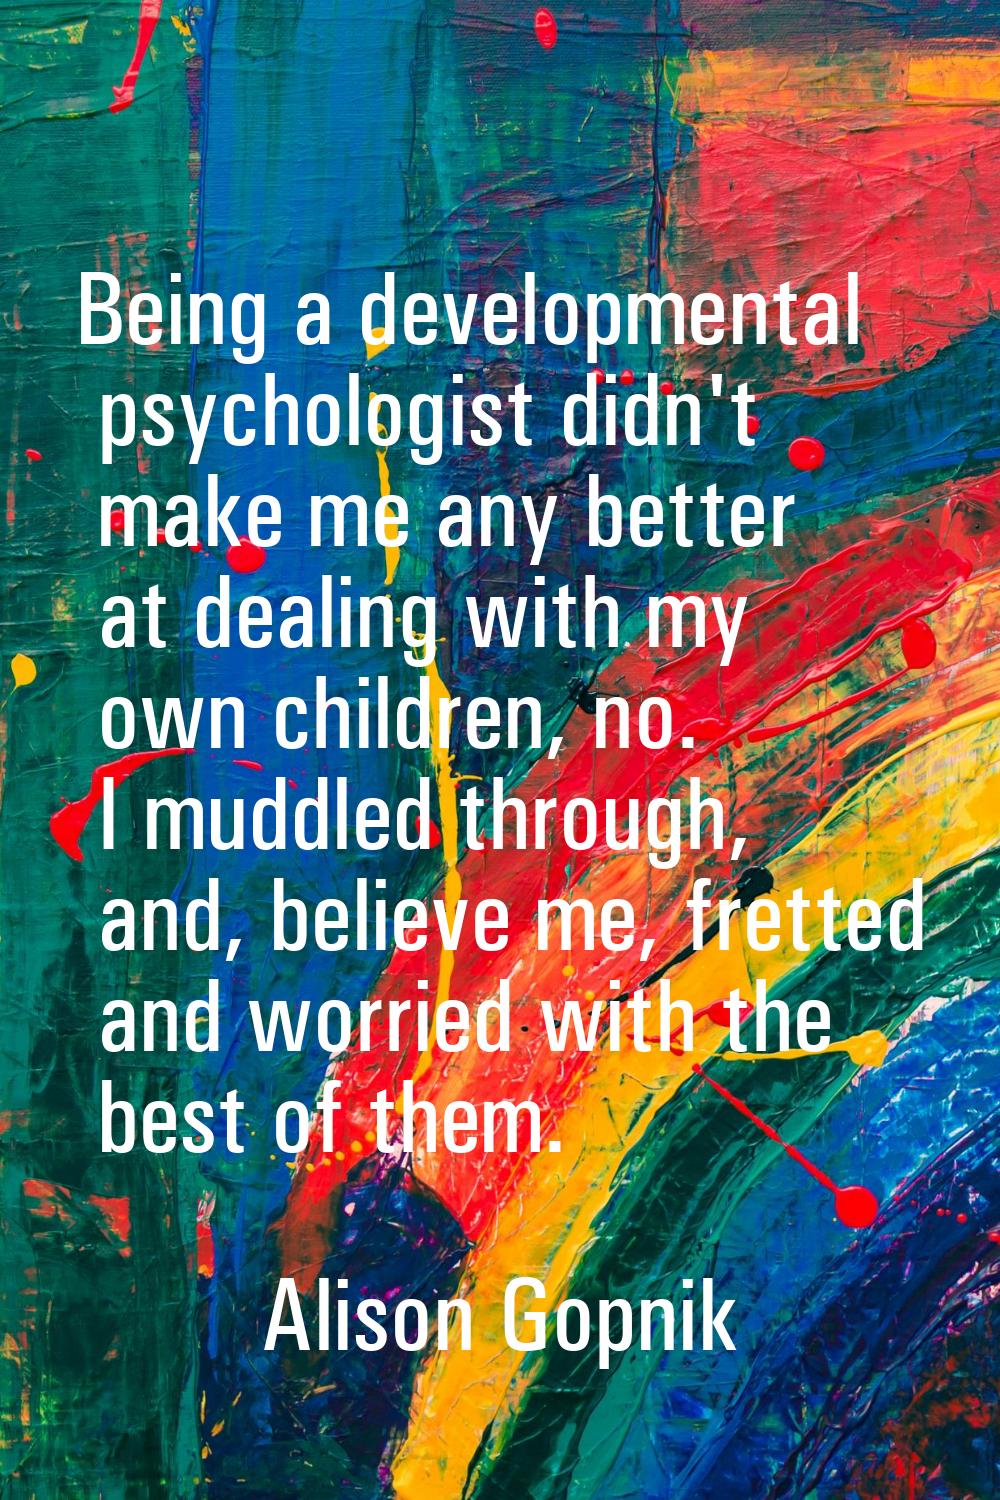 Being a developmental psychologist didn't make me any better at dealing with my own children, no. I